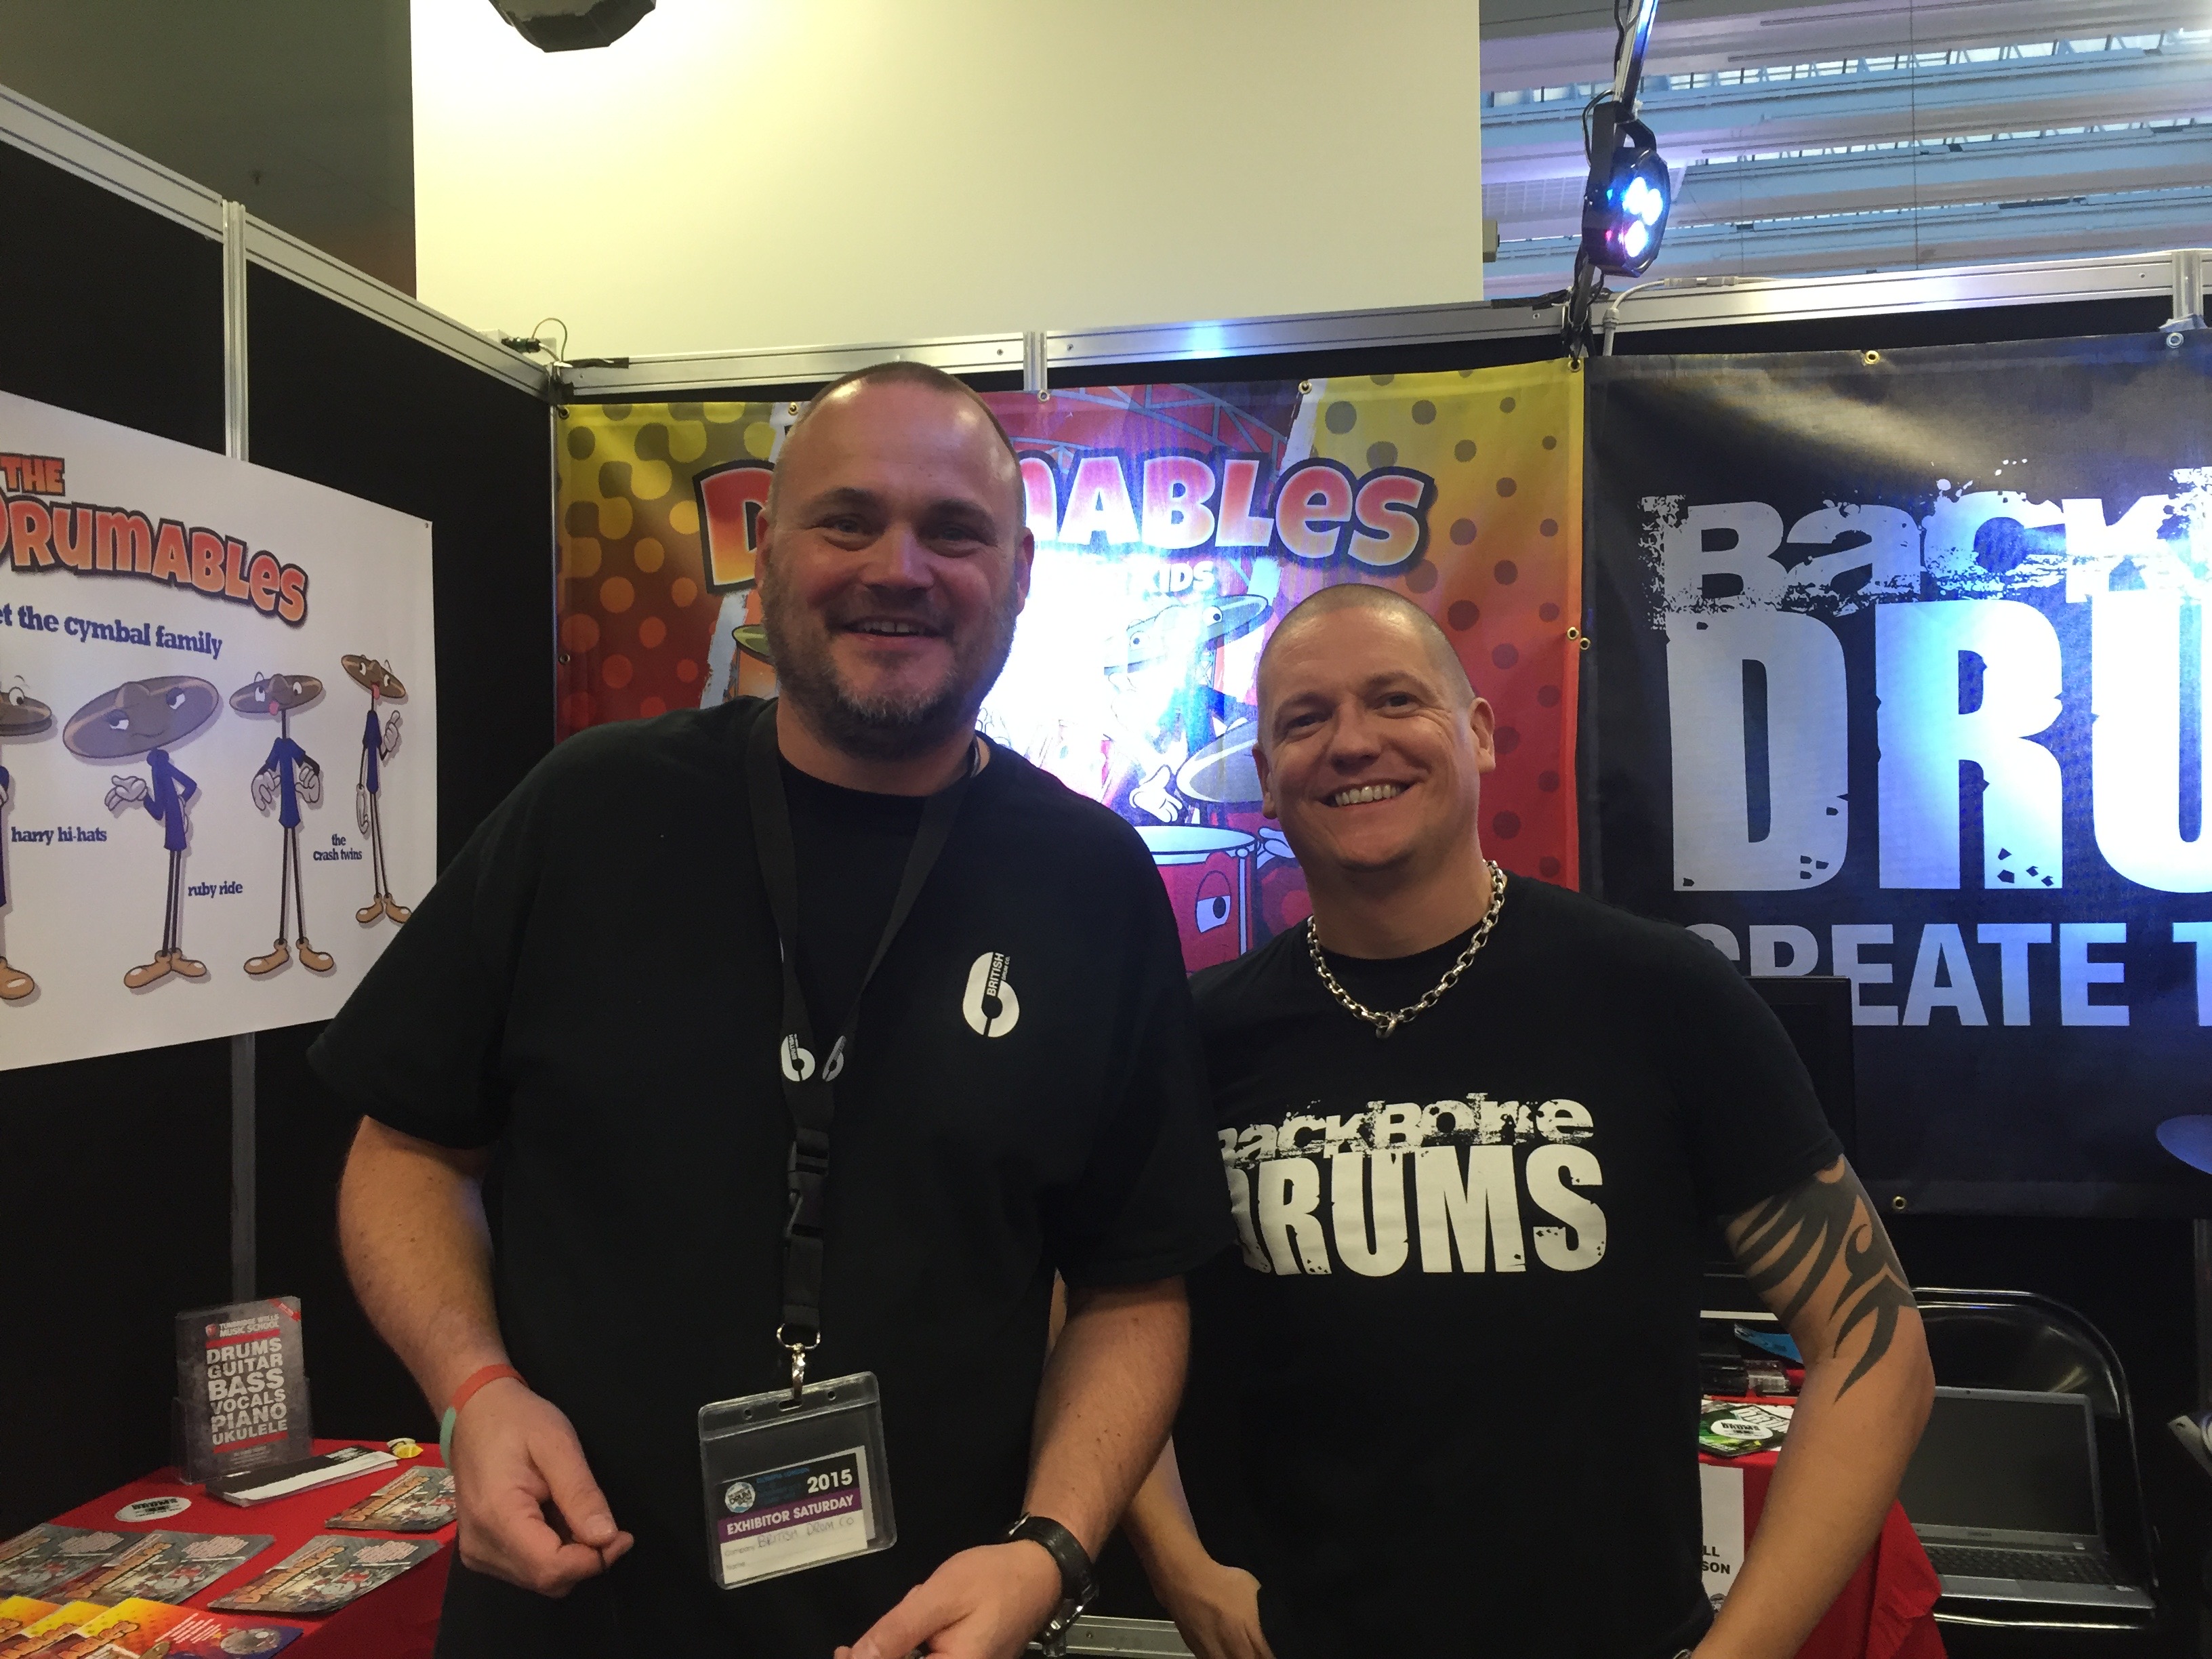 Al Murray at the BBD stand at the London Drum Show